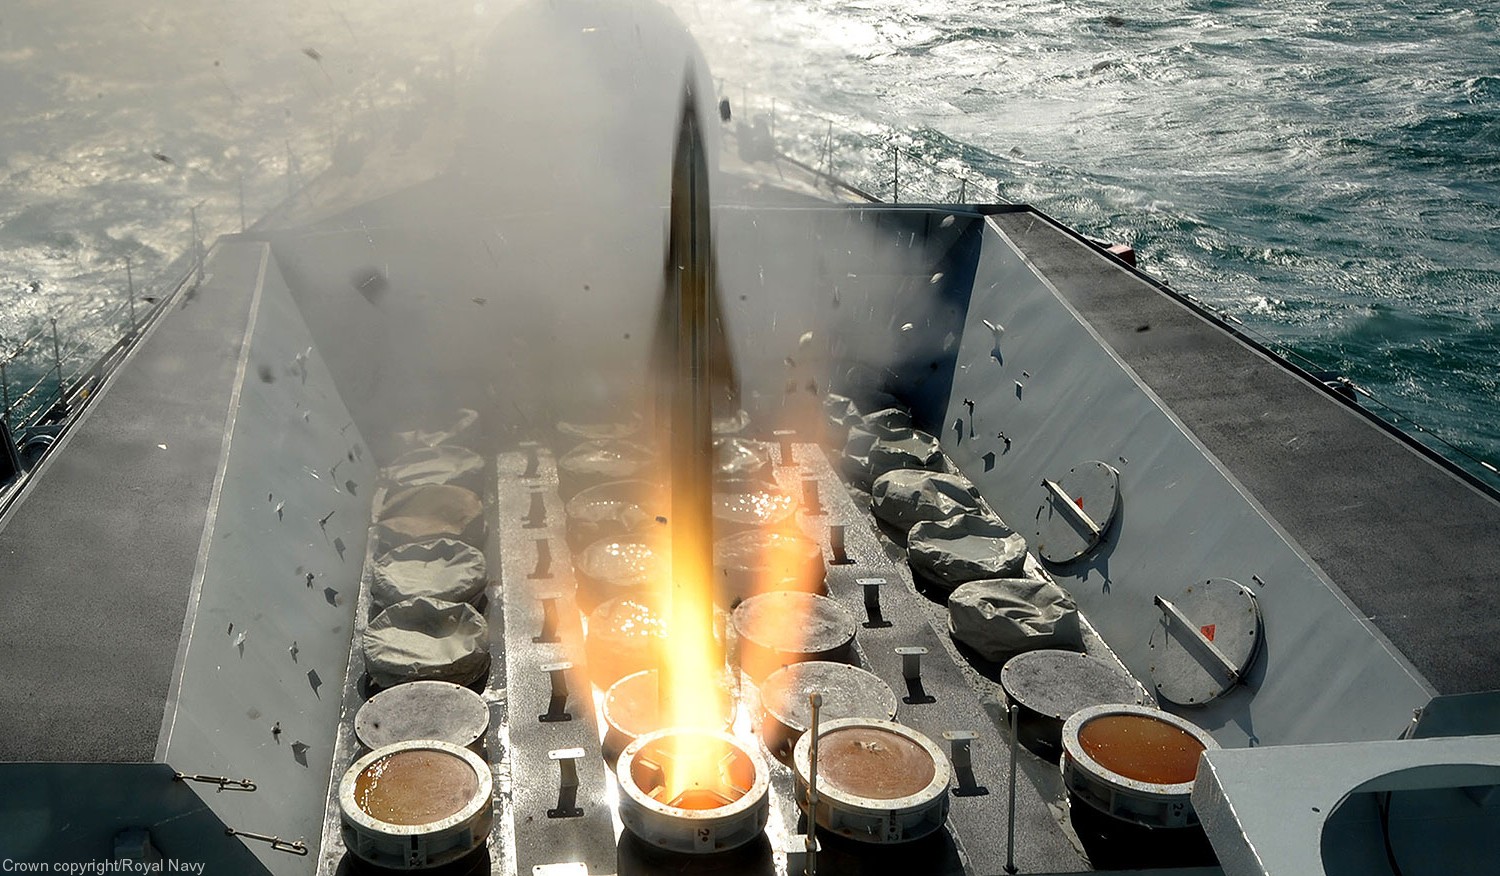 sea wolf sam missile gws-26 guided weapon system vertical launch type 23 duke class frigate royal navy 08